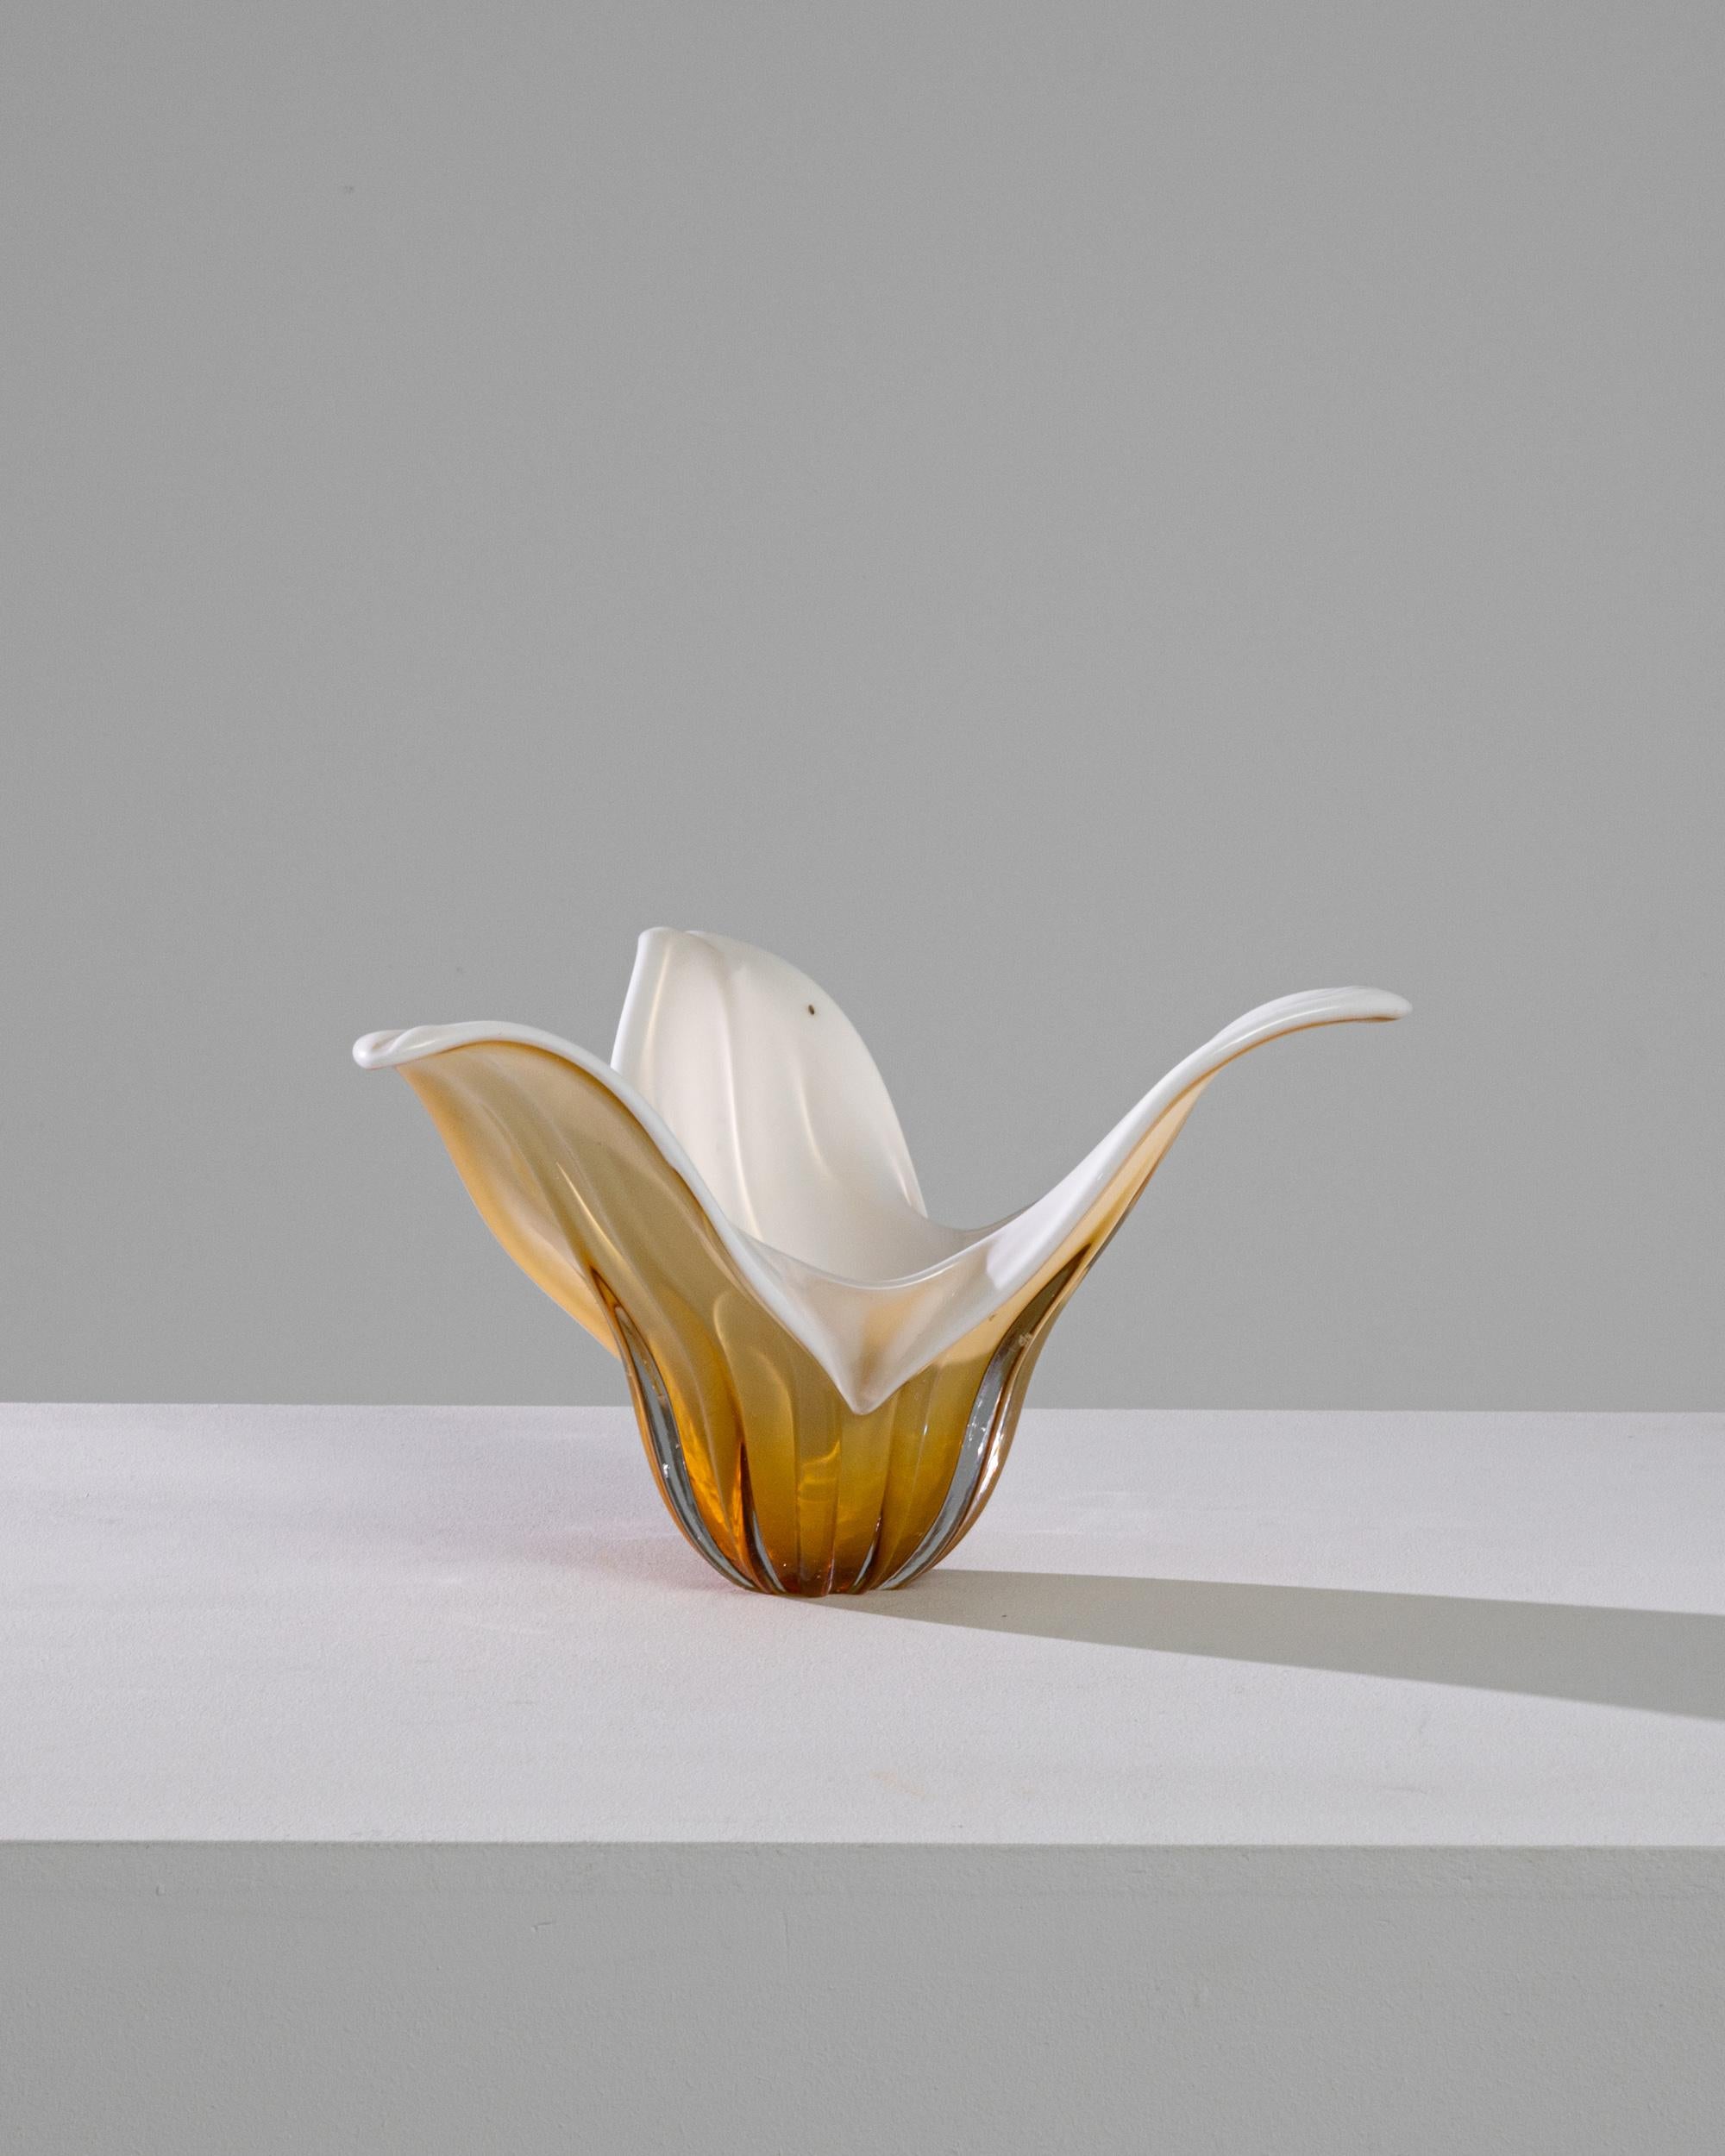 The liquid lines of this glass vase create an exquisite centerpiece. Made in Italy in the 1960s, expressive craftsmanship gives this piece a dynamic floral shape; a blossom captured in the instant of unfurling. Amber and golden tones at the base